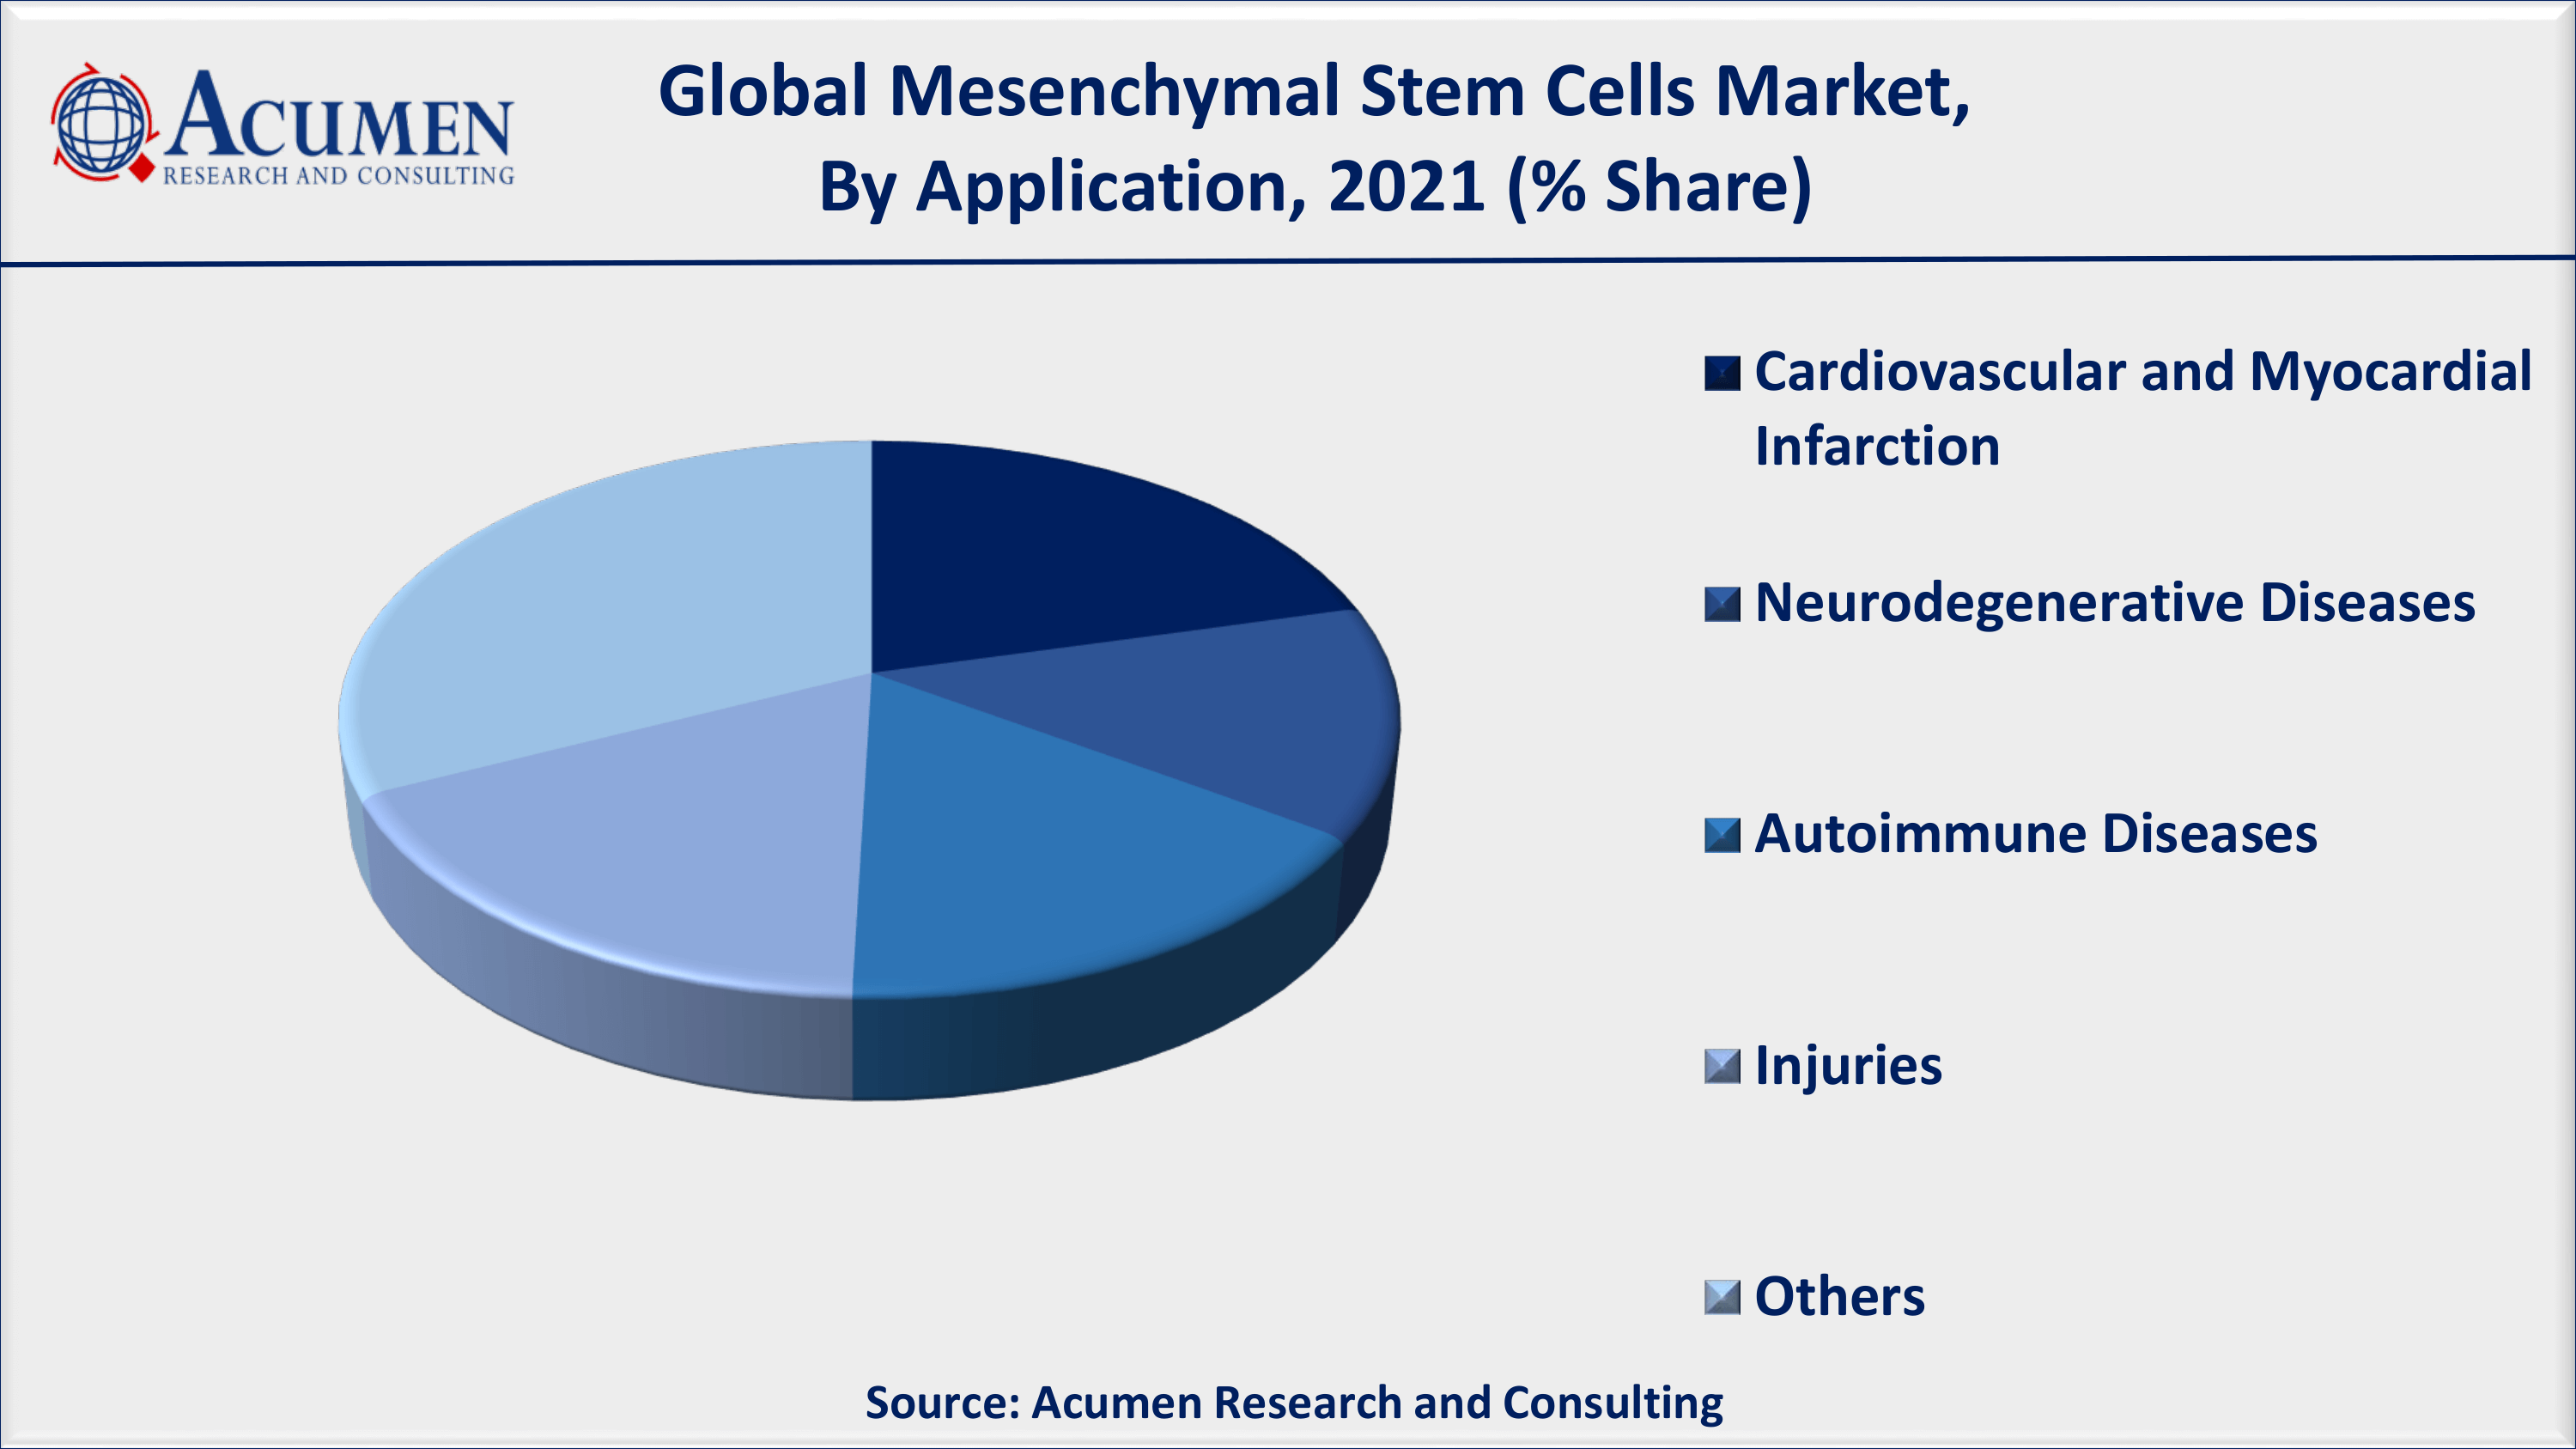 Growing cases of chronic disorders fuels the global mesenchymal stem cells market value